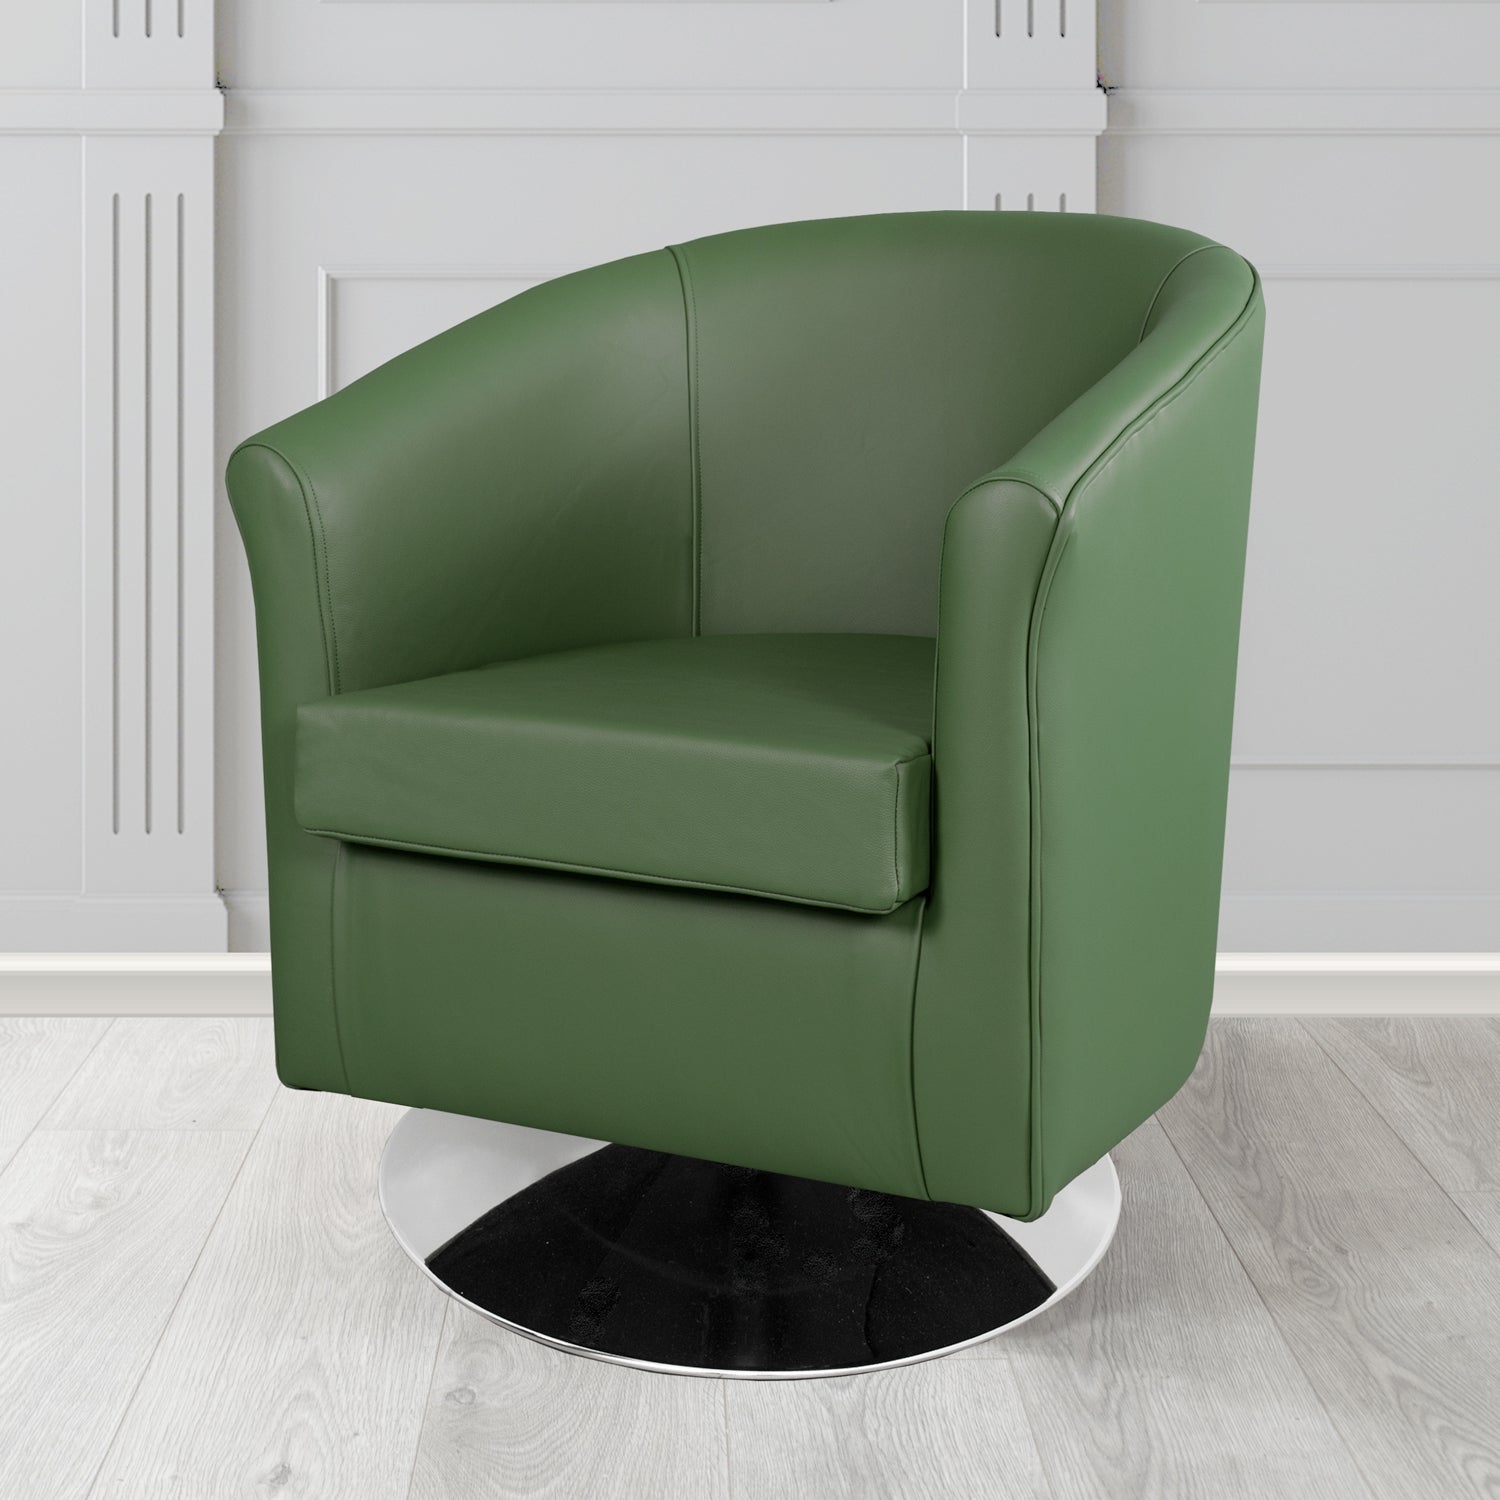 Tuscany Shelly Forest Green Crib 5 Genuine Leather Swivel Tub Chair - The Tub Chair Shop